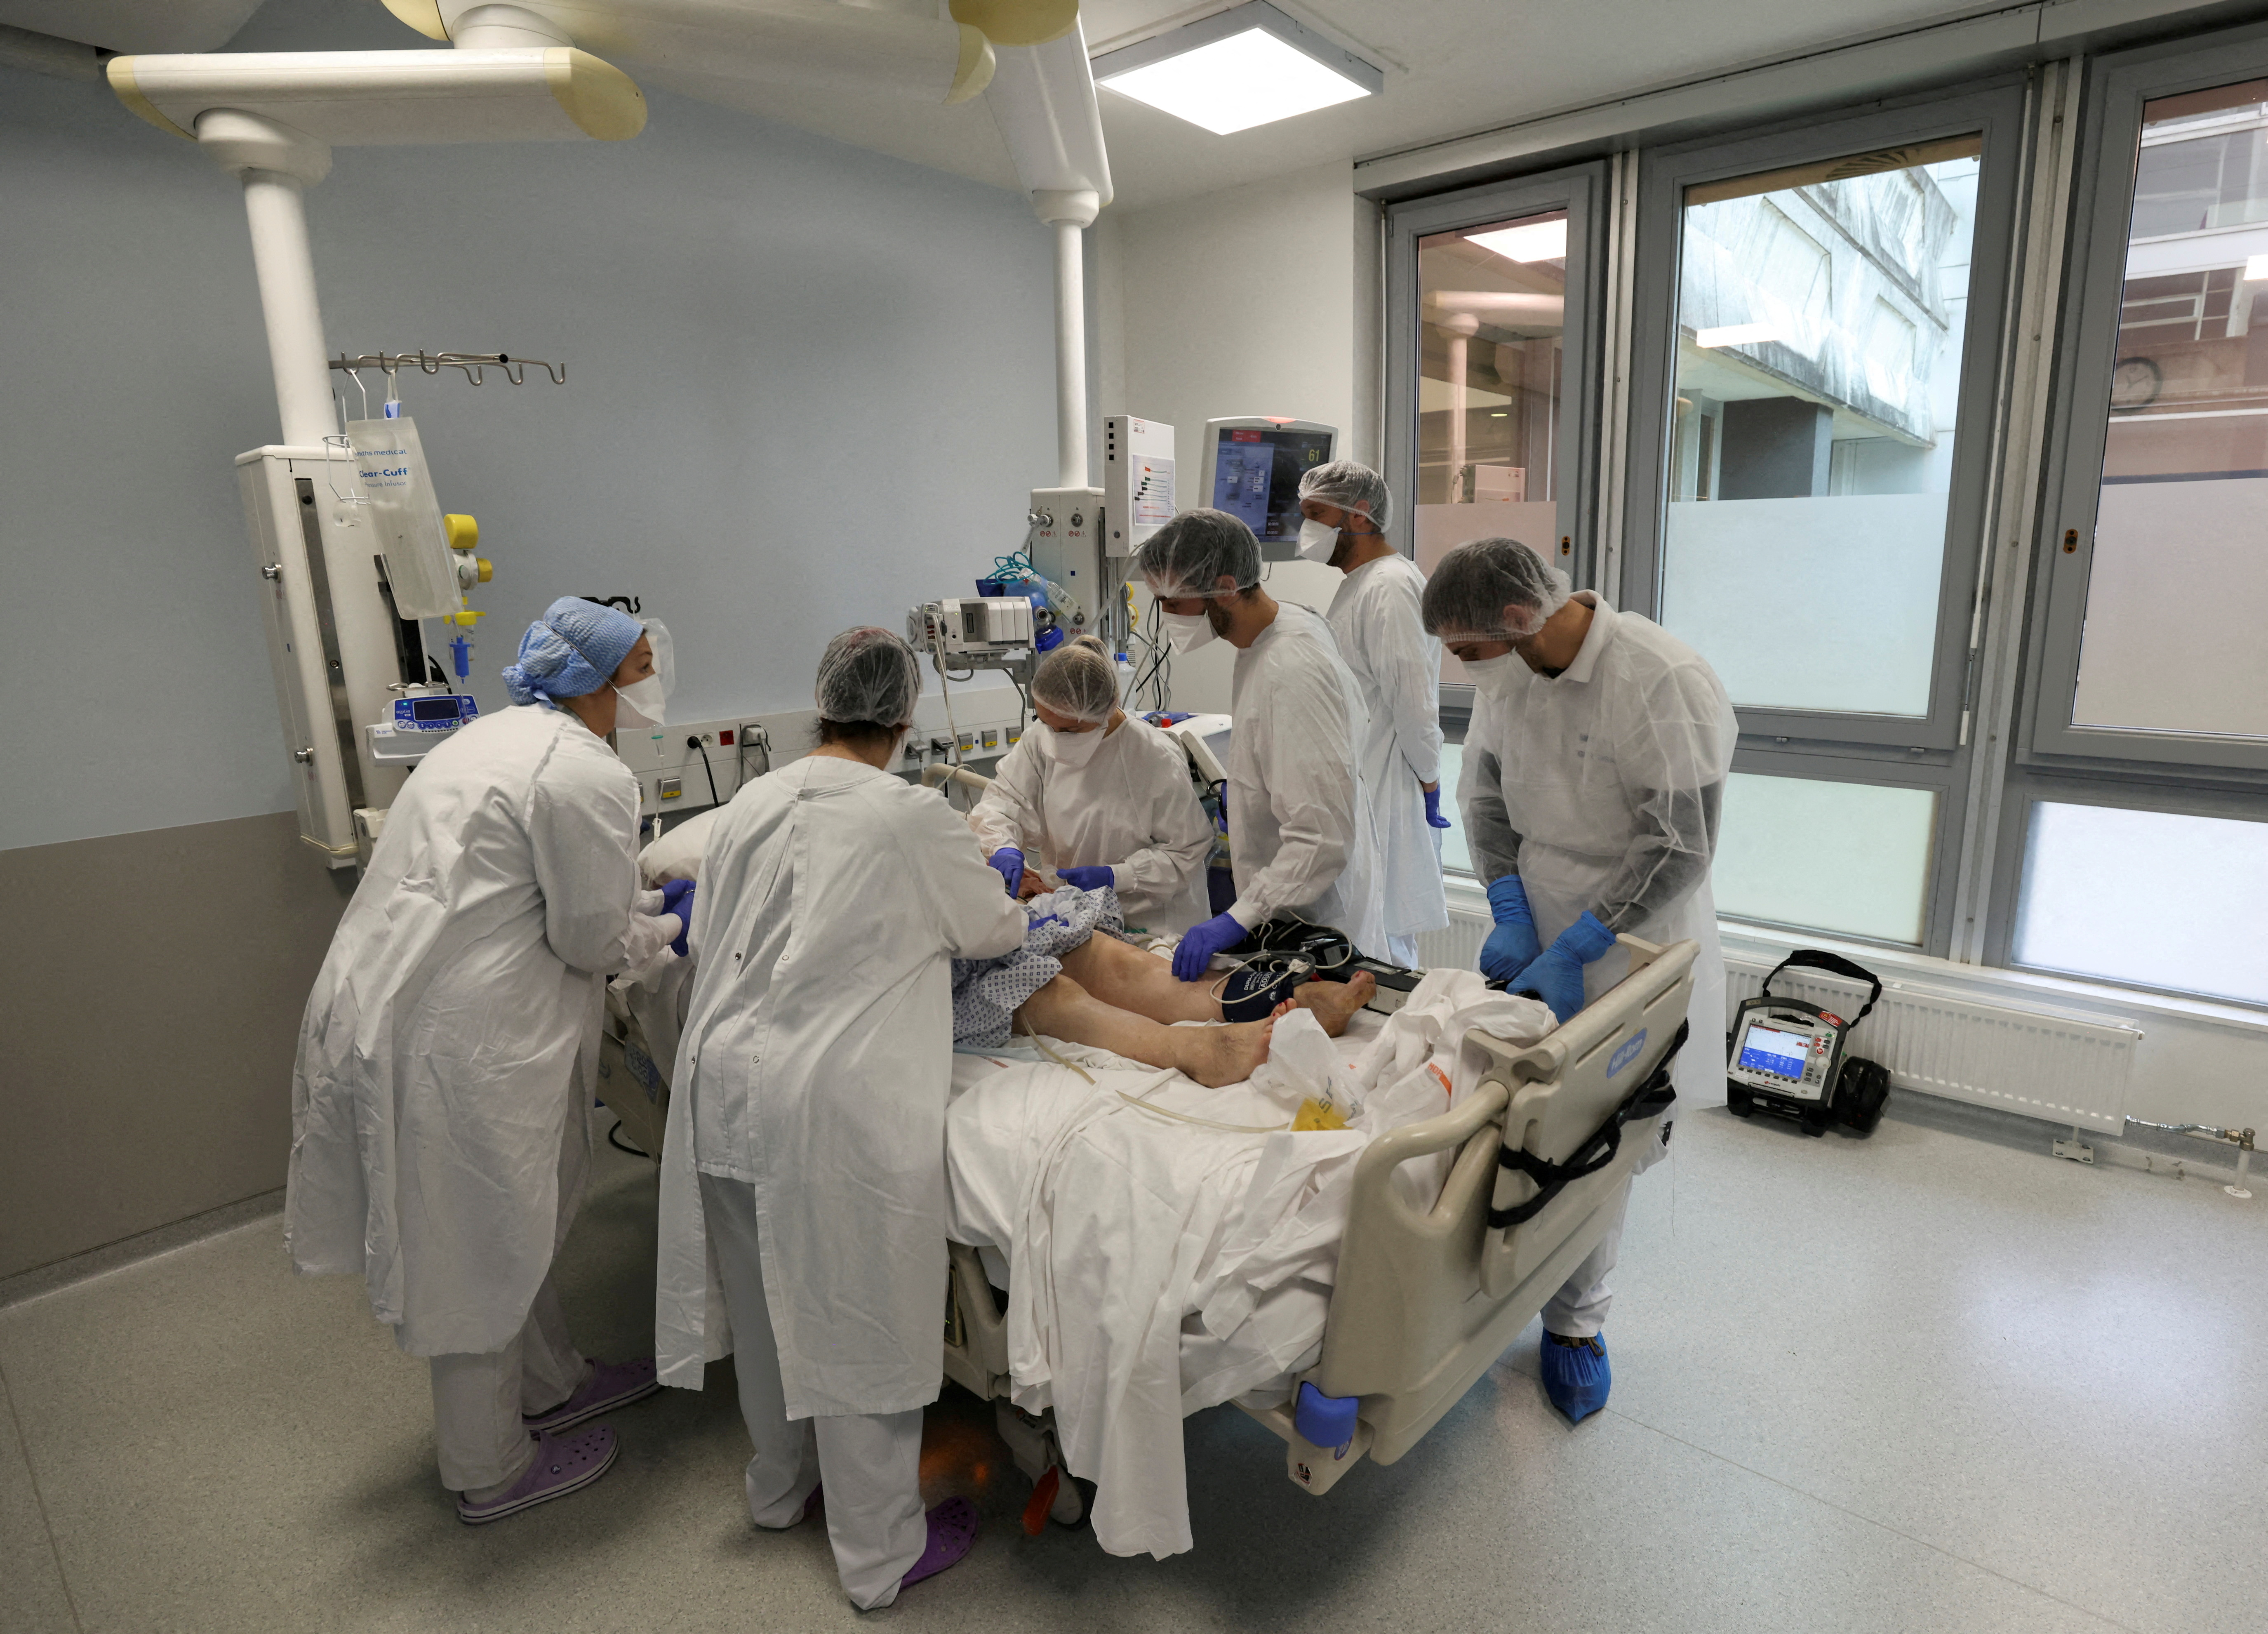 Intensive Care Unit (ICU) for COVID-19 patients at the Emile Muller GHRMSA hospital in Mulhouse, France